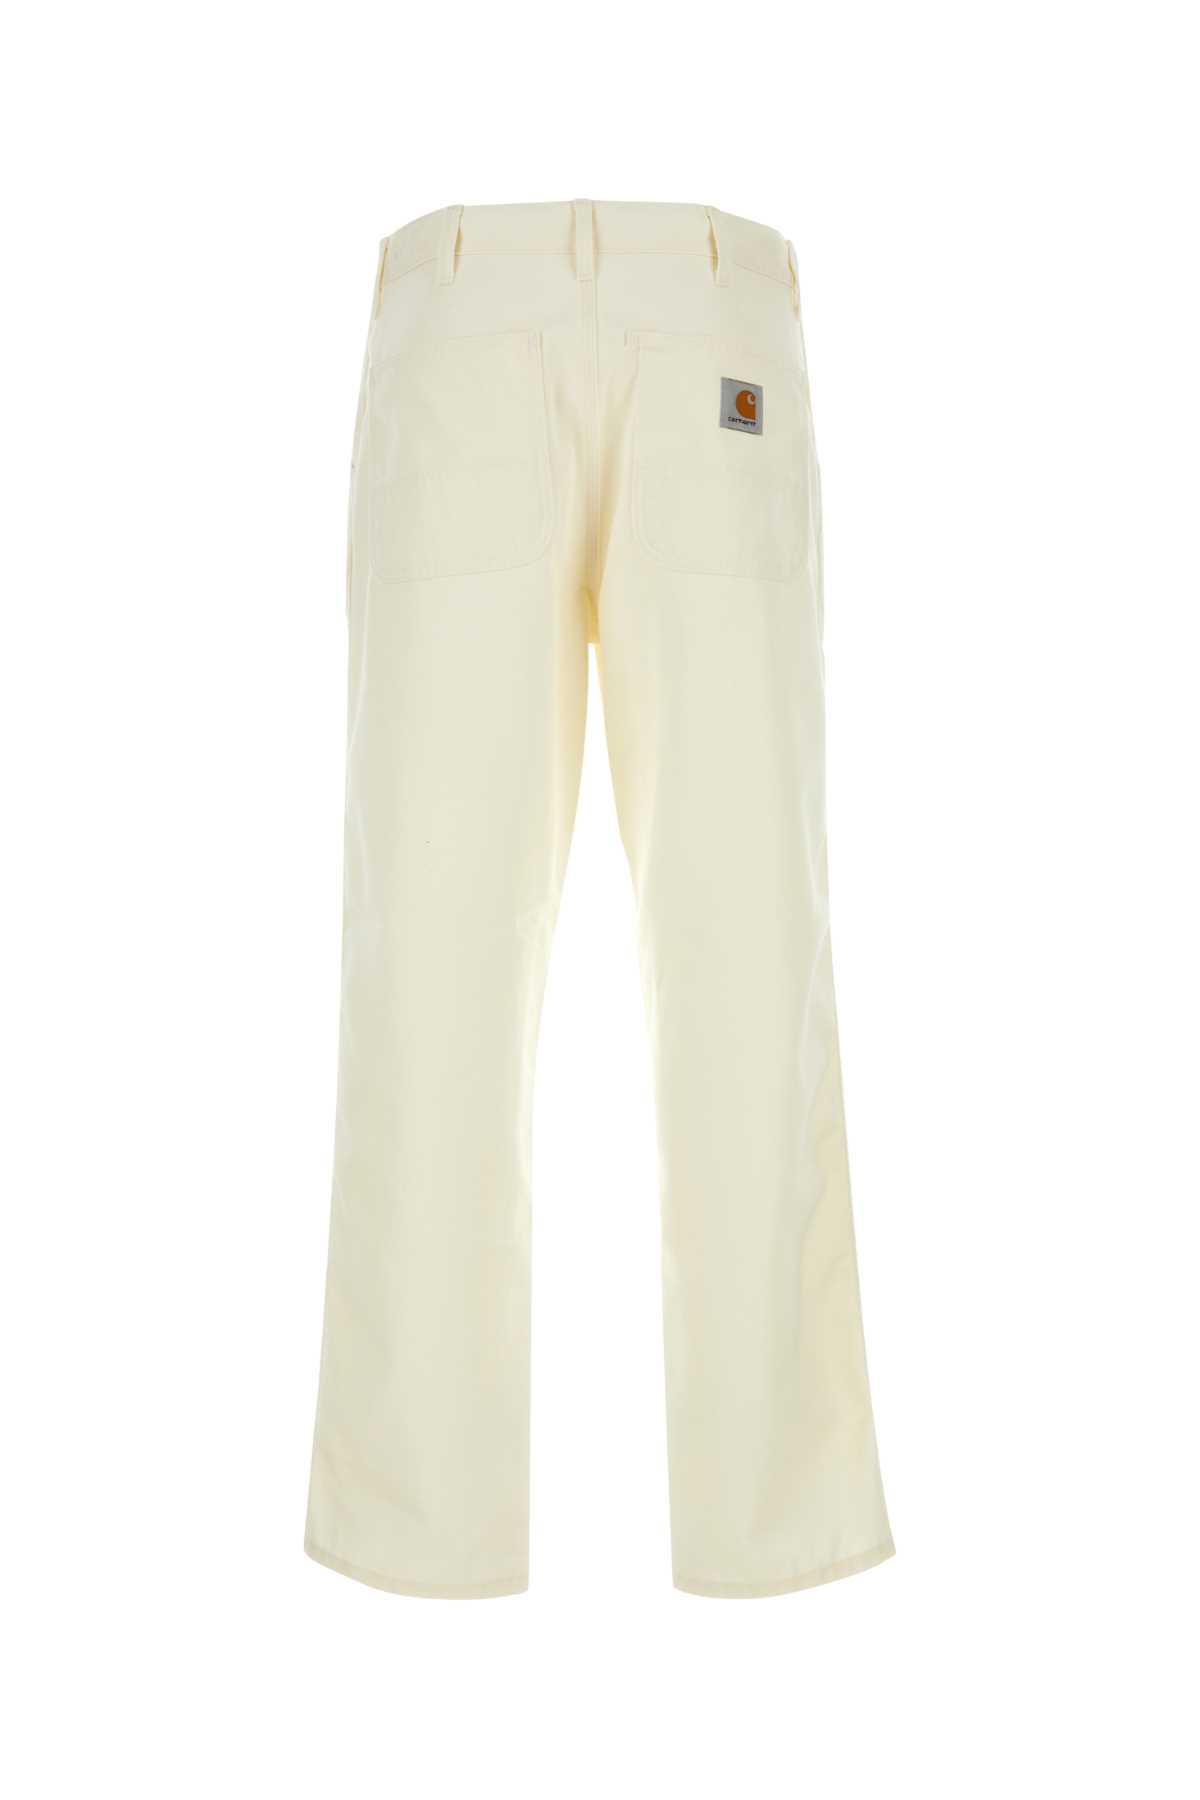 Carhartt Ivory Polyester Blend Simple Pant In Wax